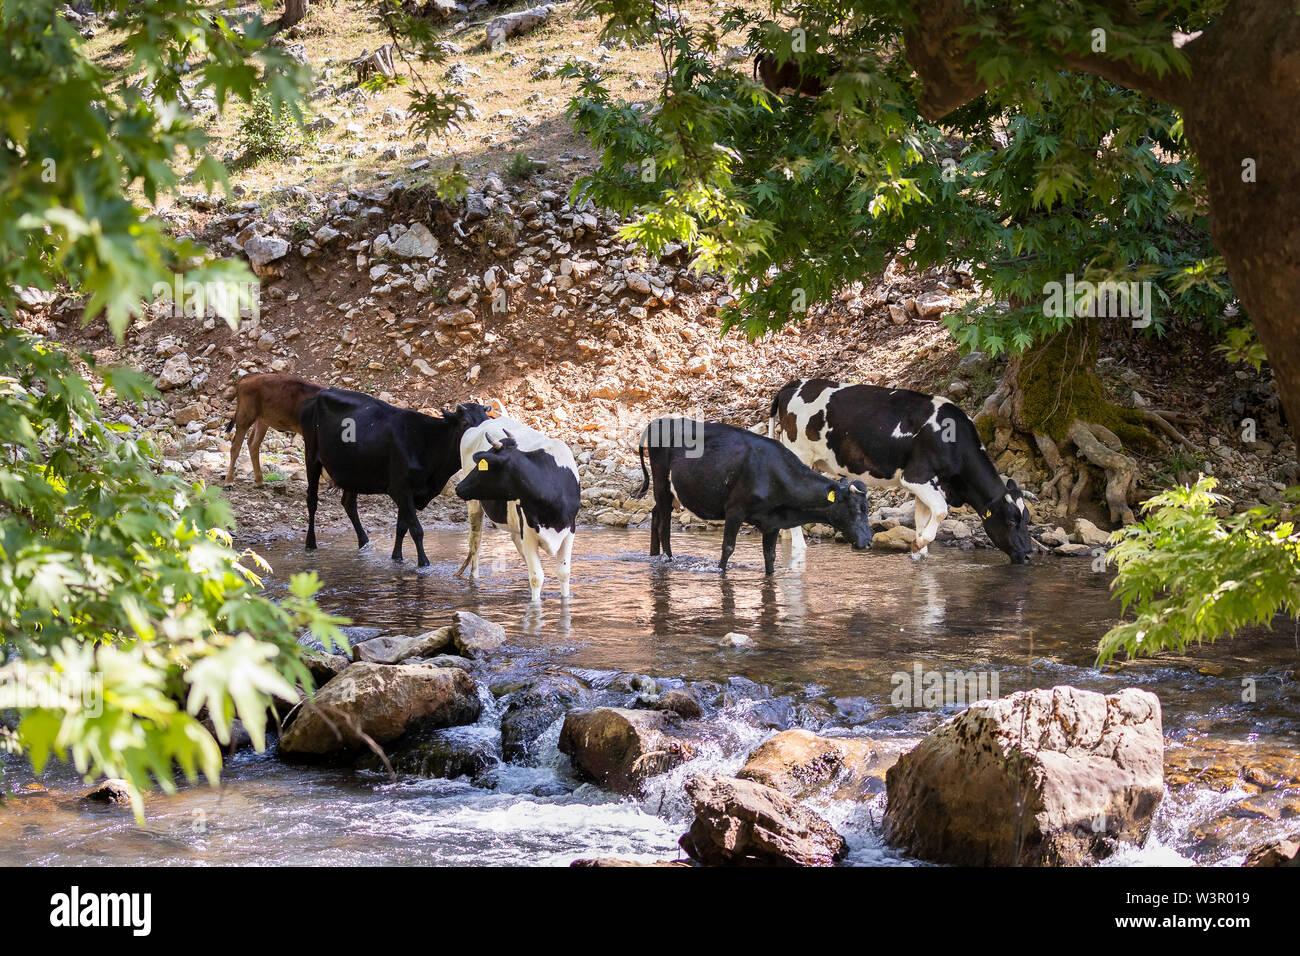 Domestic Cattle. Free-ranging black and white cattle. Group cooling down in a stream. Einfyayla, Turkey Stock Photo